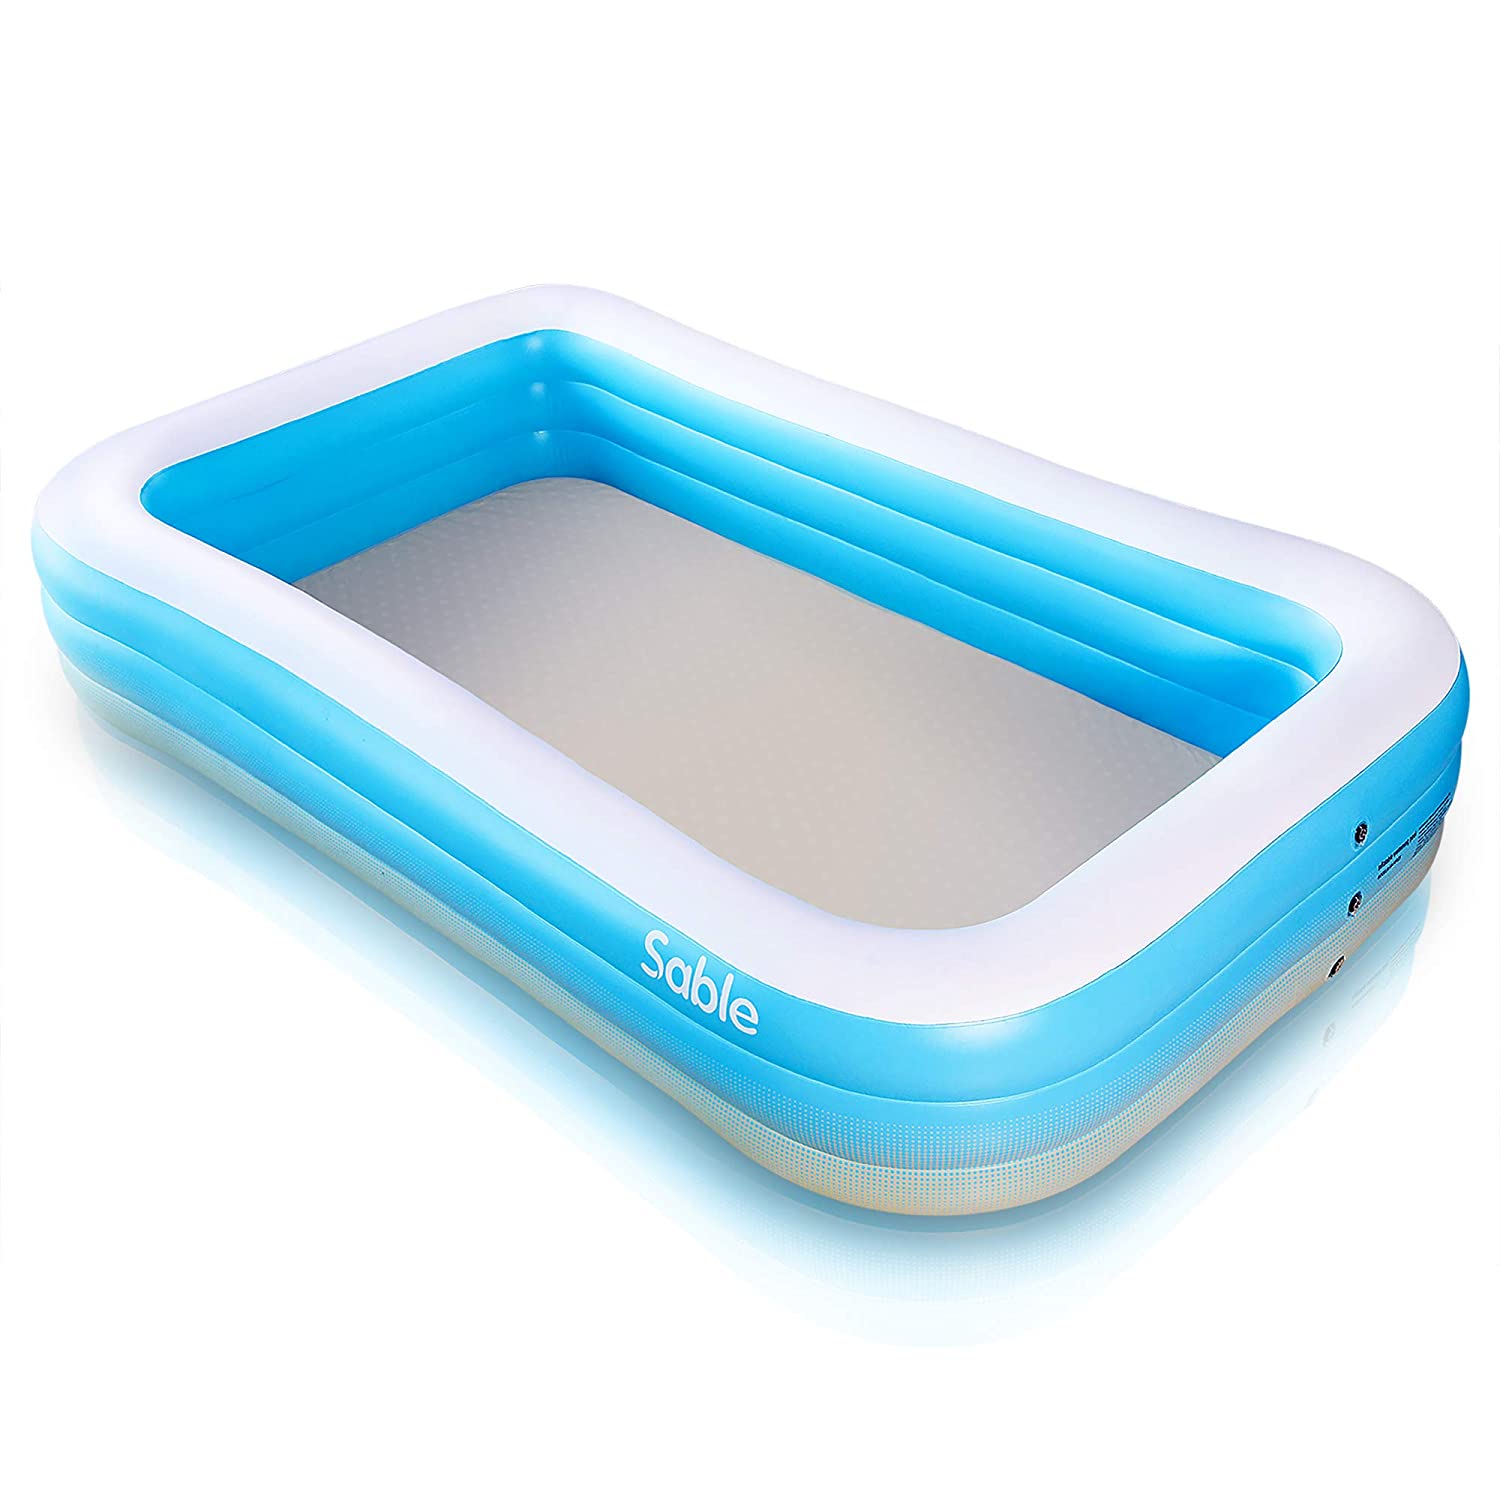 Inflatable Pool, Sable Swimming Pool for Baby, Kiddie, Kids, Adult, Infant, Toddler, 118" X 72" X 20", for Ages 3+